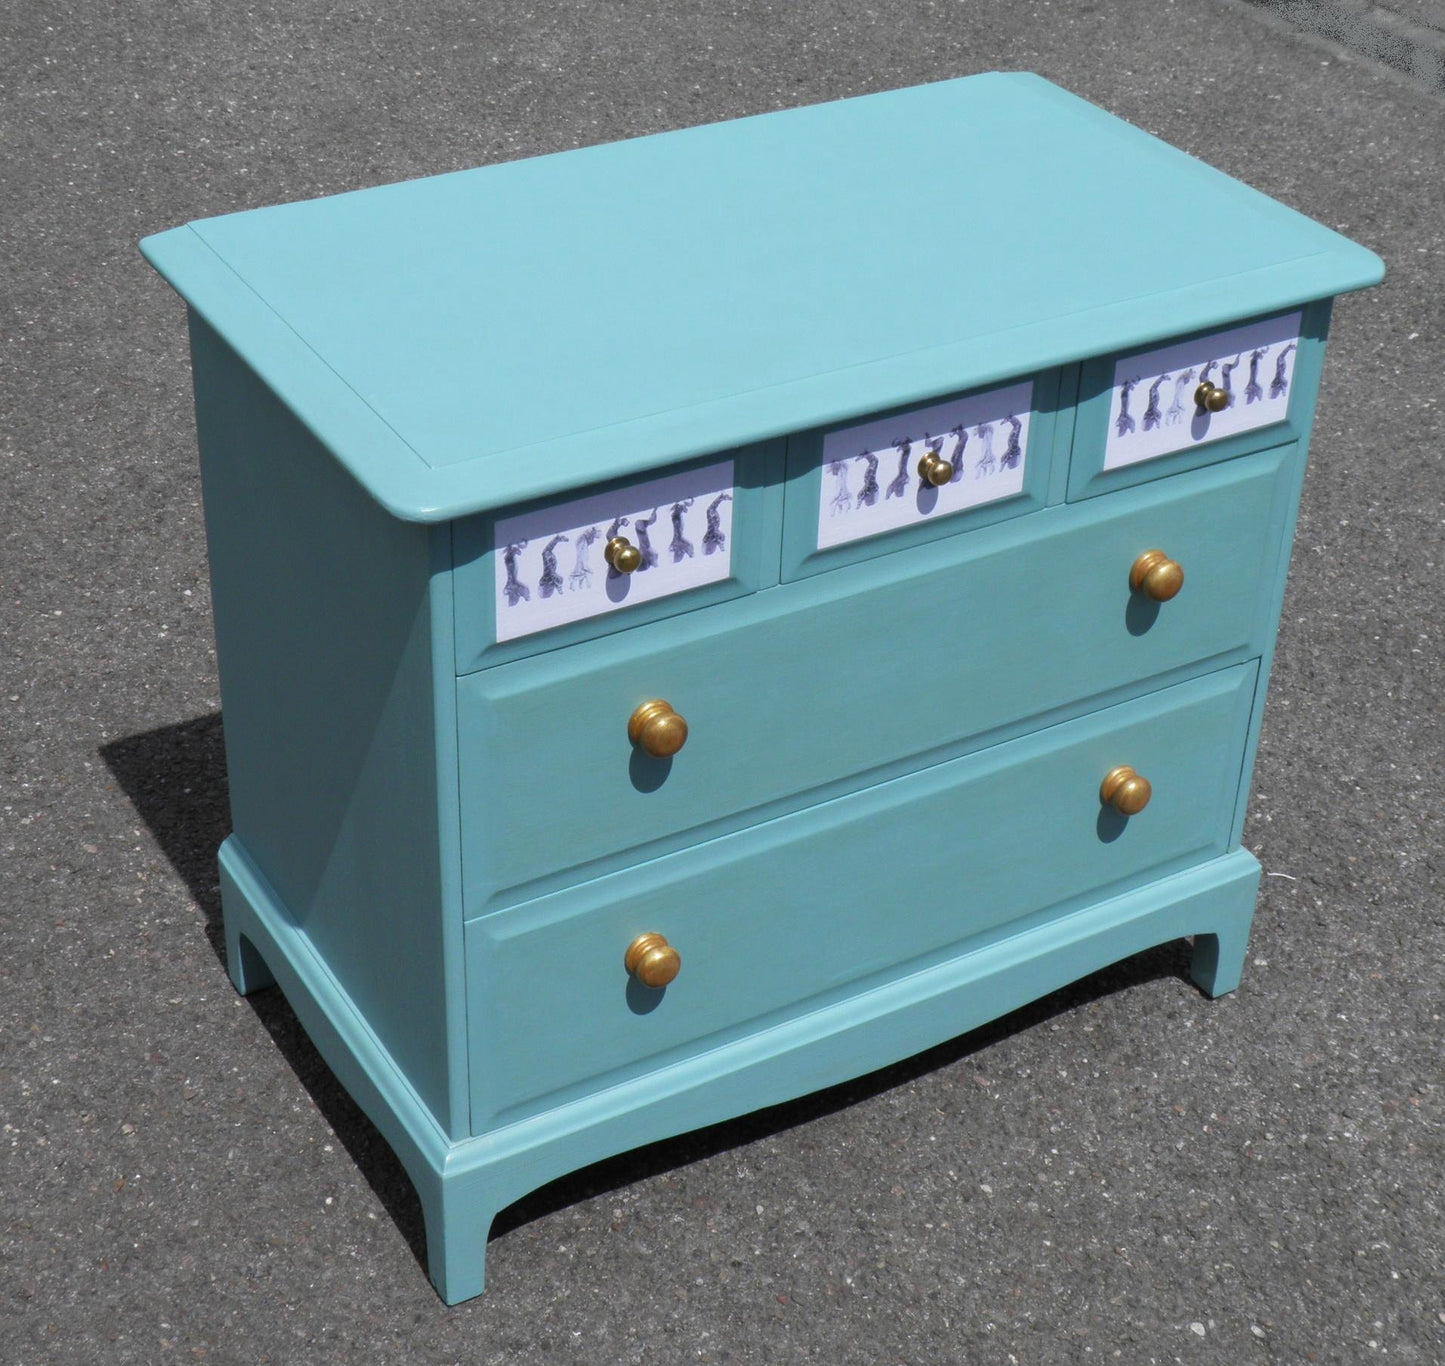 Vintage Stag Minstrel Chest Of Drawers.